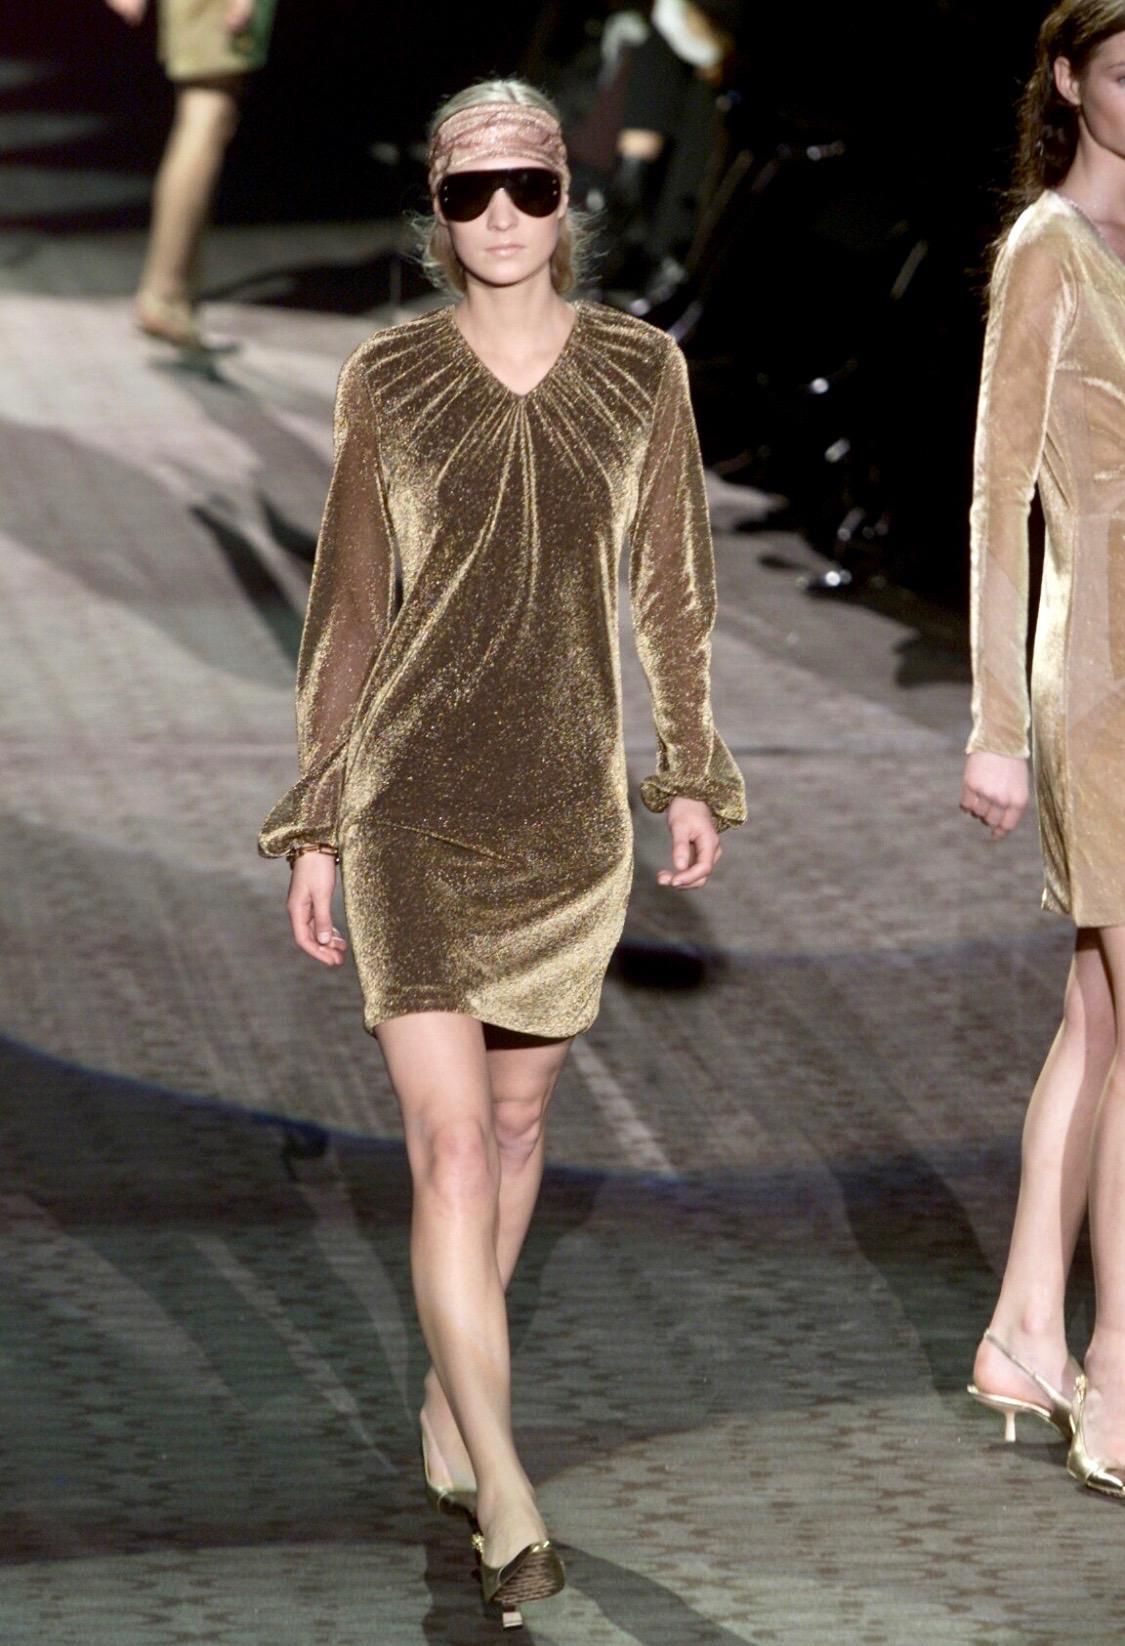 Presenting a shimmering disco-chic sheer gold blouse designed by Tom Ford for Gucci's Fall/Winter 2000. The dress version of this fabulous top debuted as look number 29 on Erika Wall on the season's runway. The sheer metallic fabric is layered at